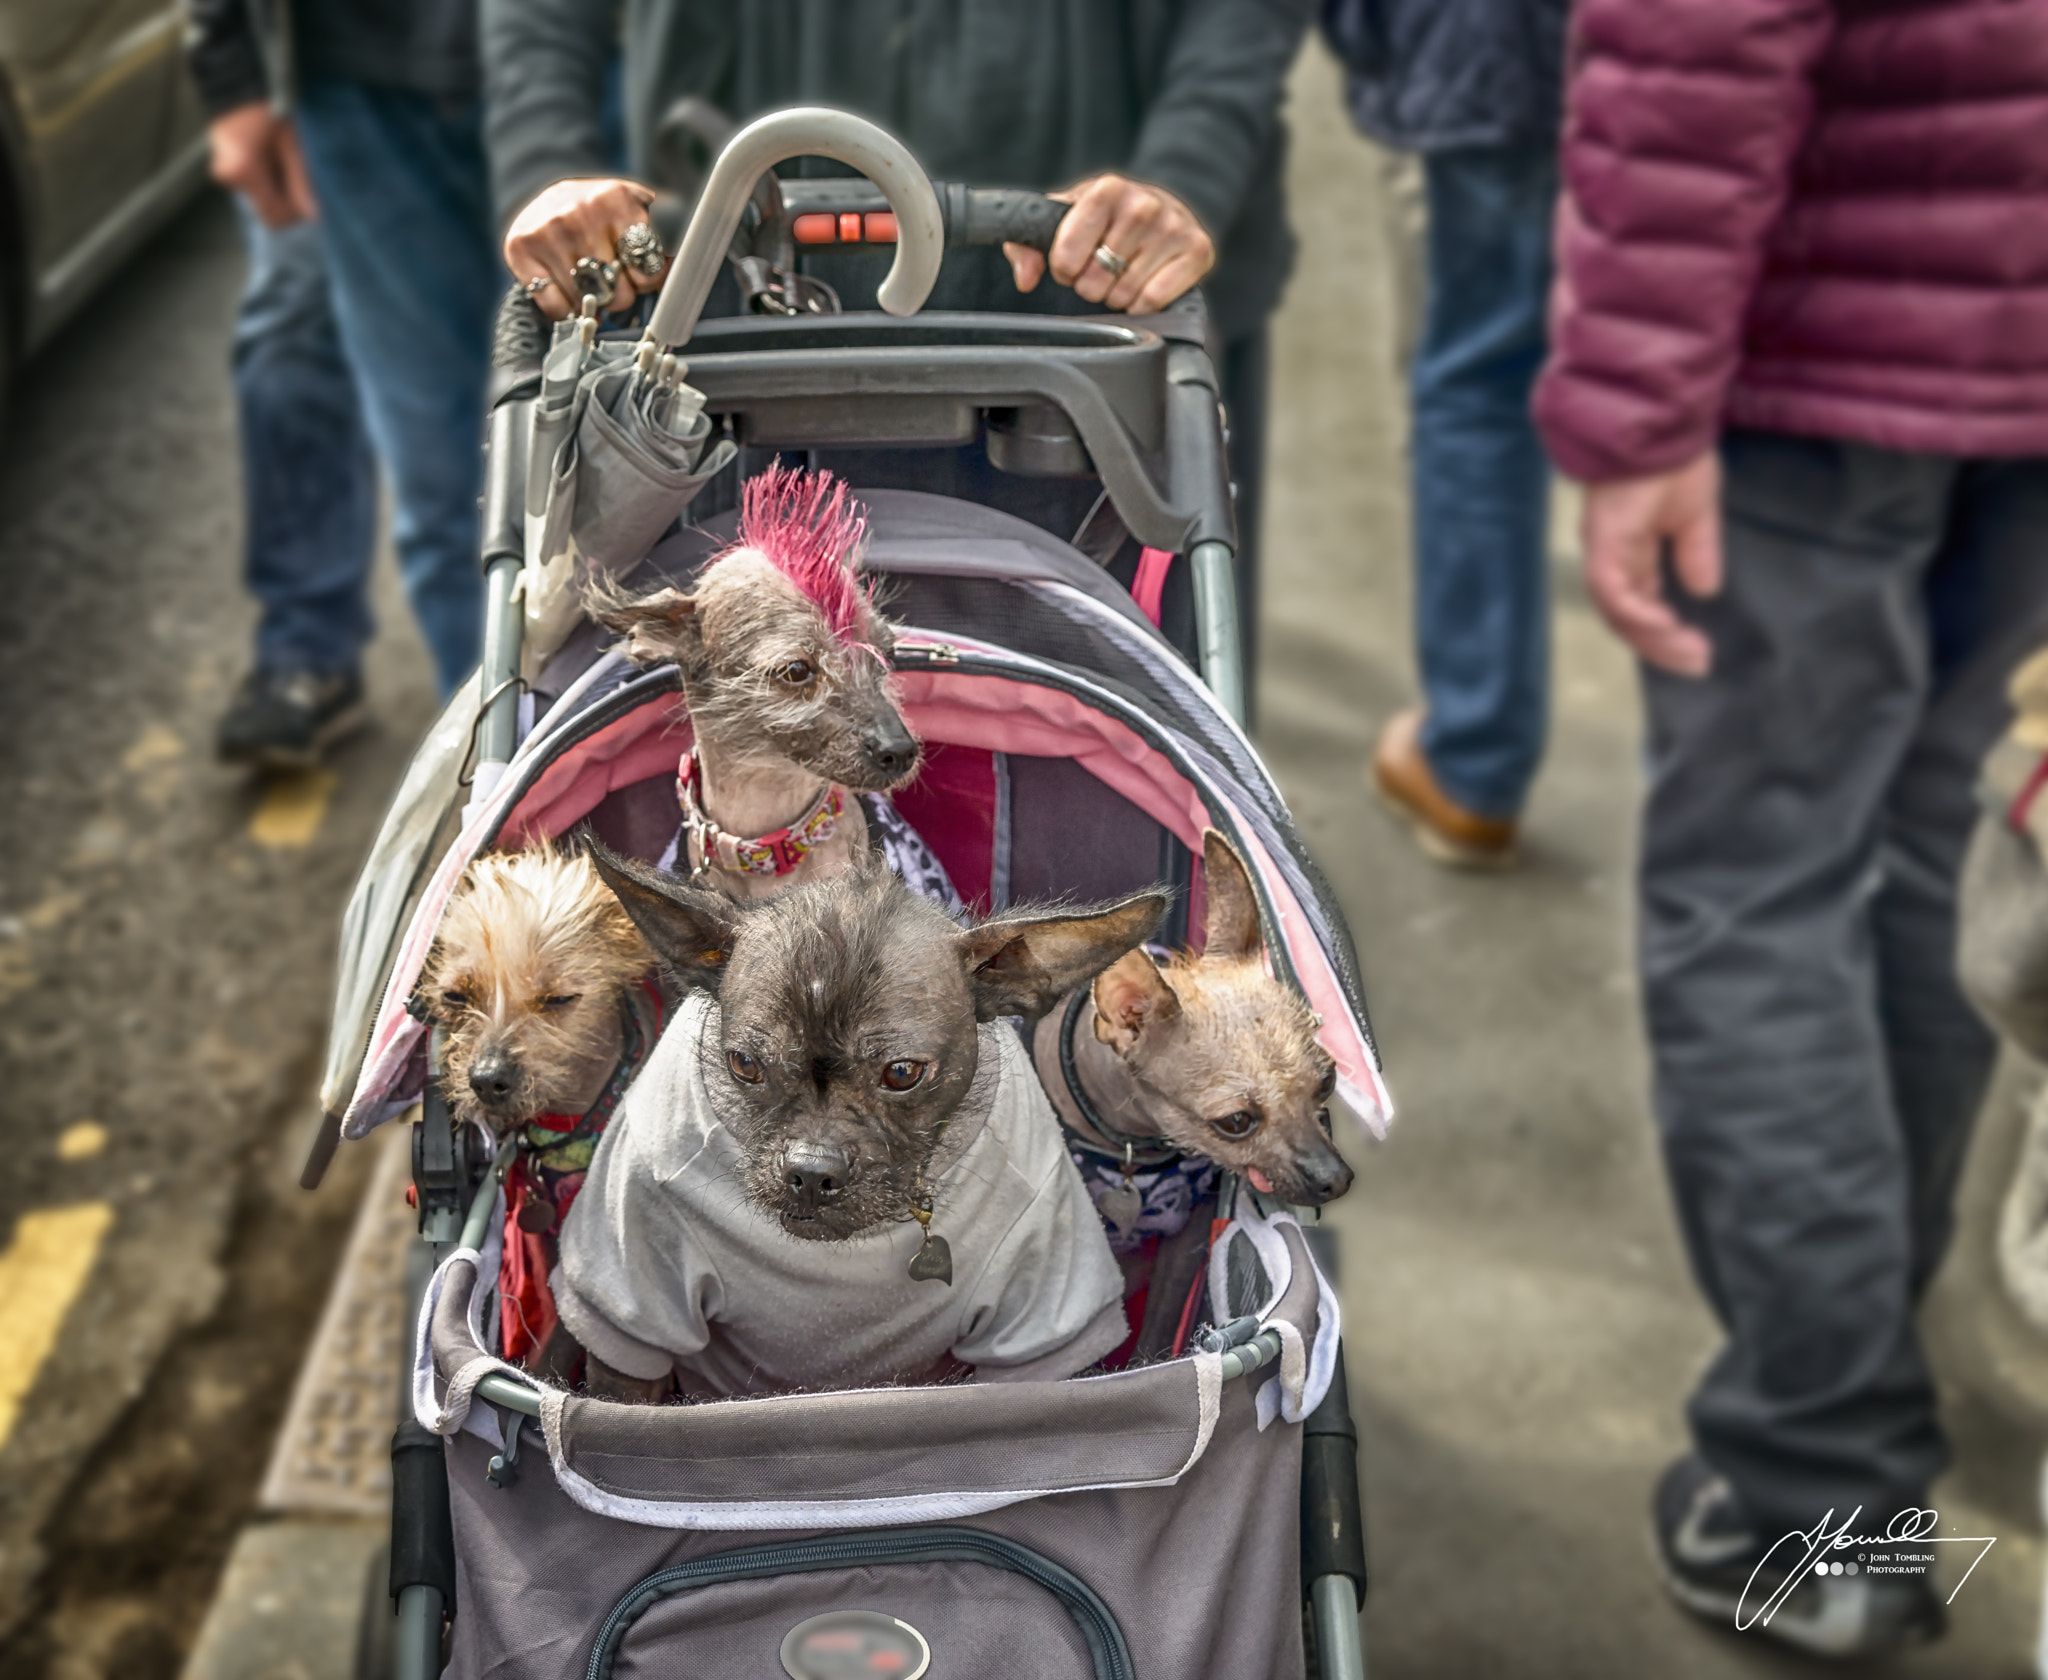 Tamron AF 28-75mm F2.8 XR Di LD Aspherical (IF) sample photo. The canine pram gang photography